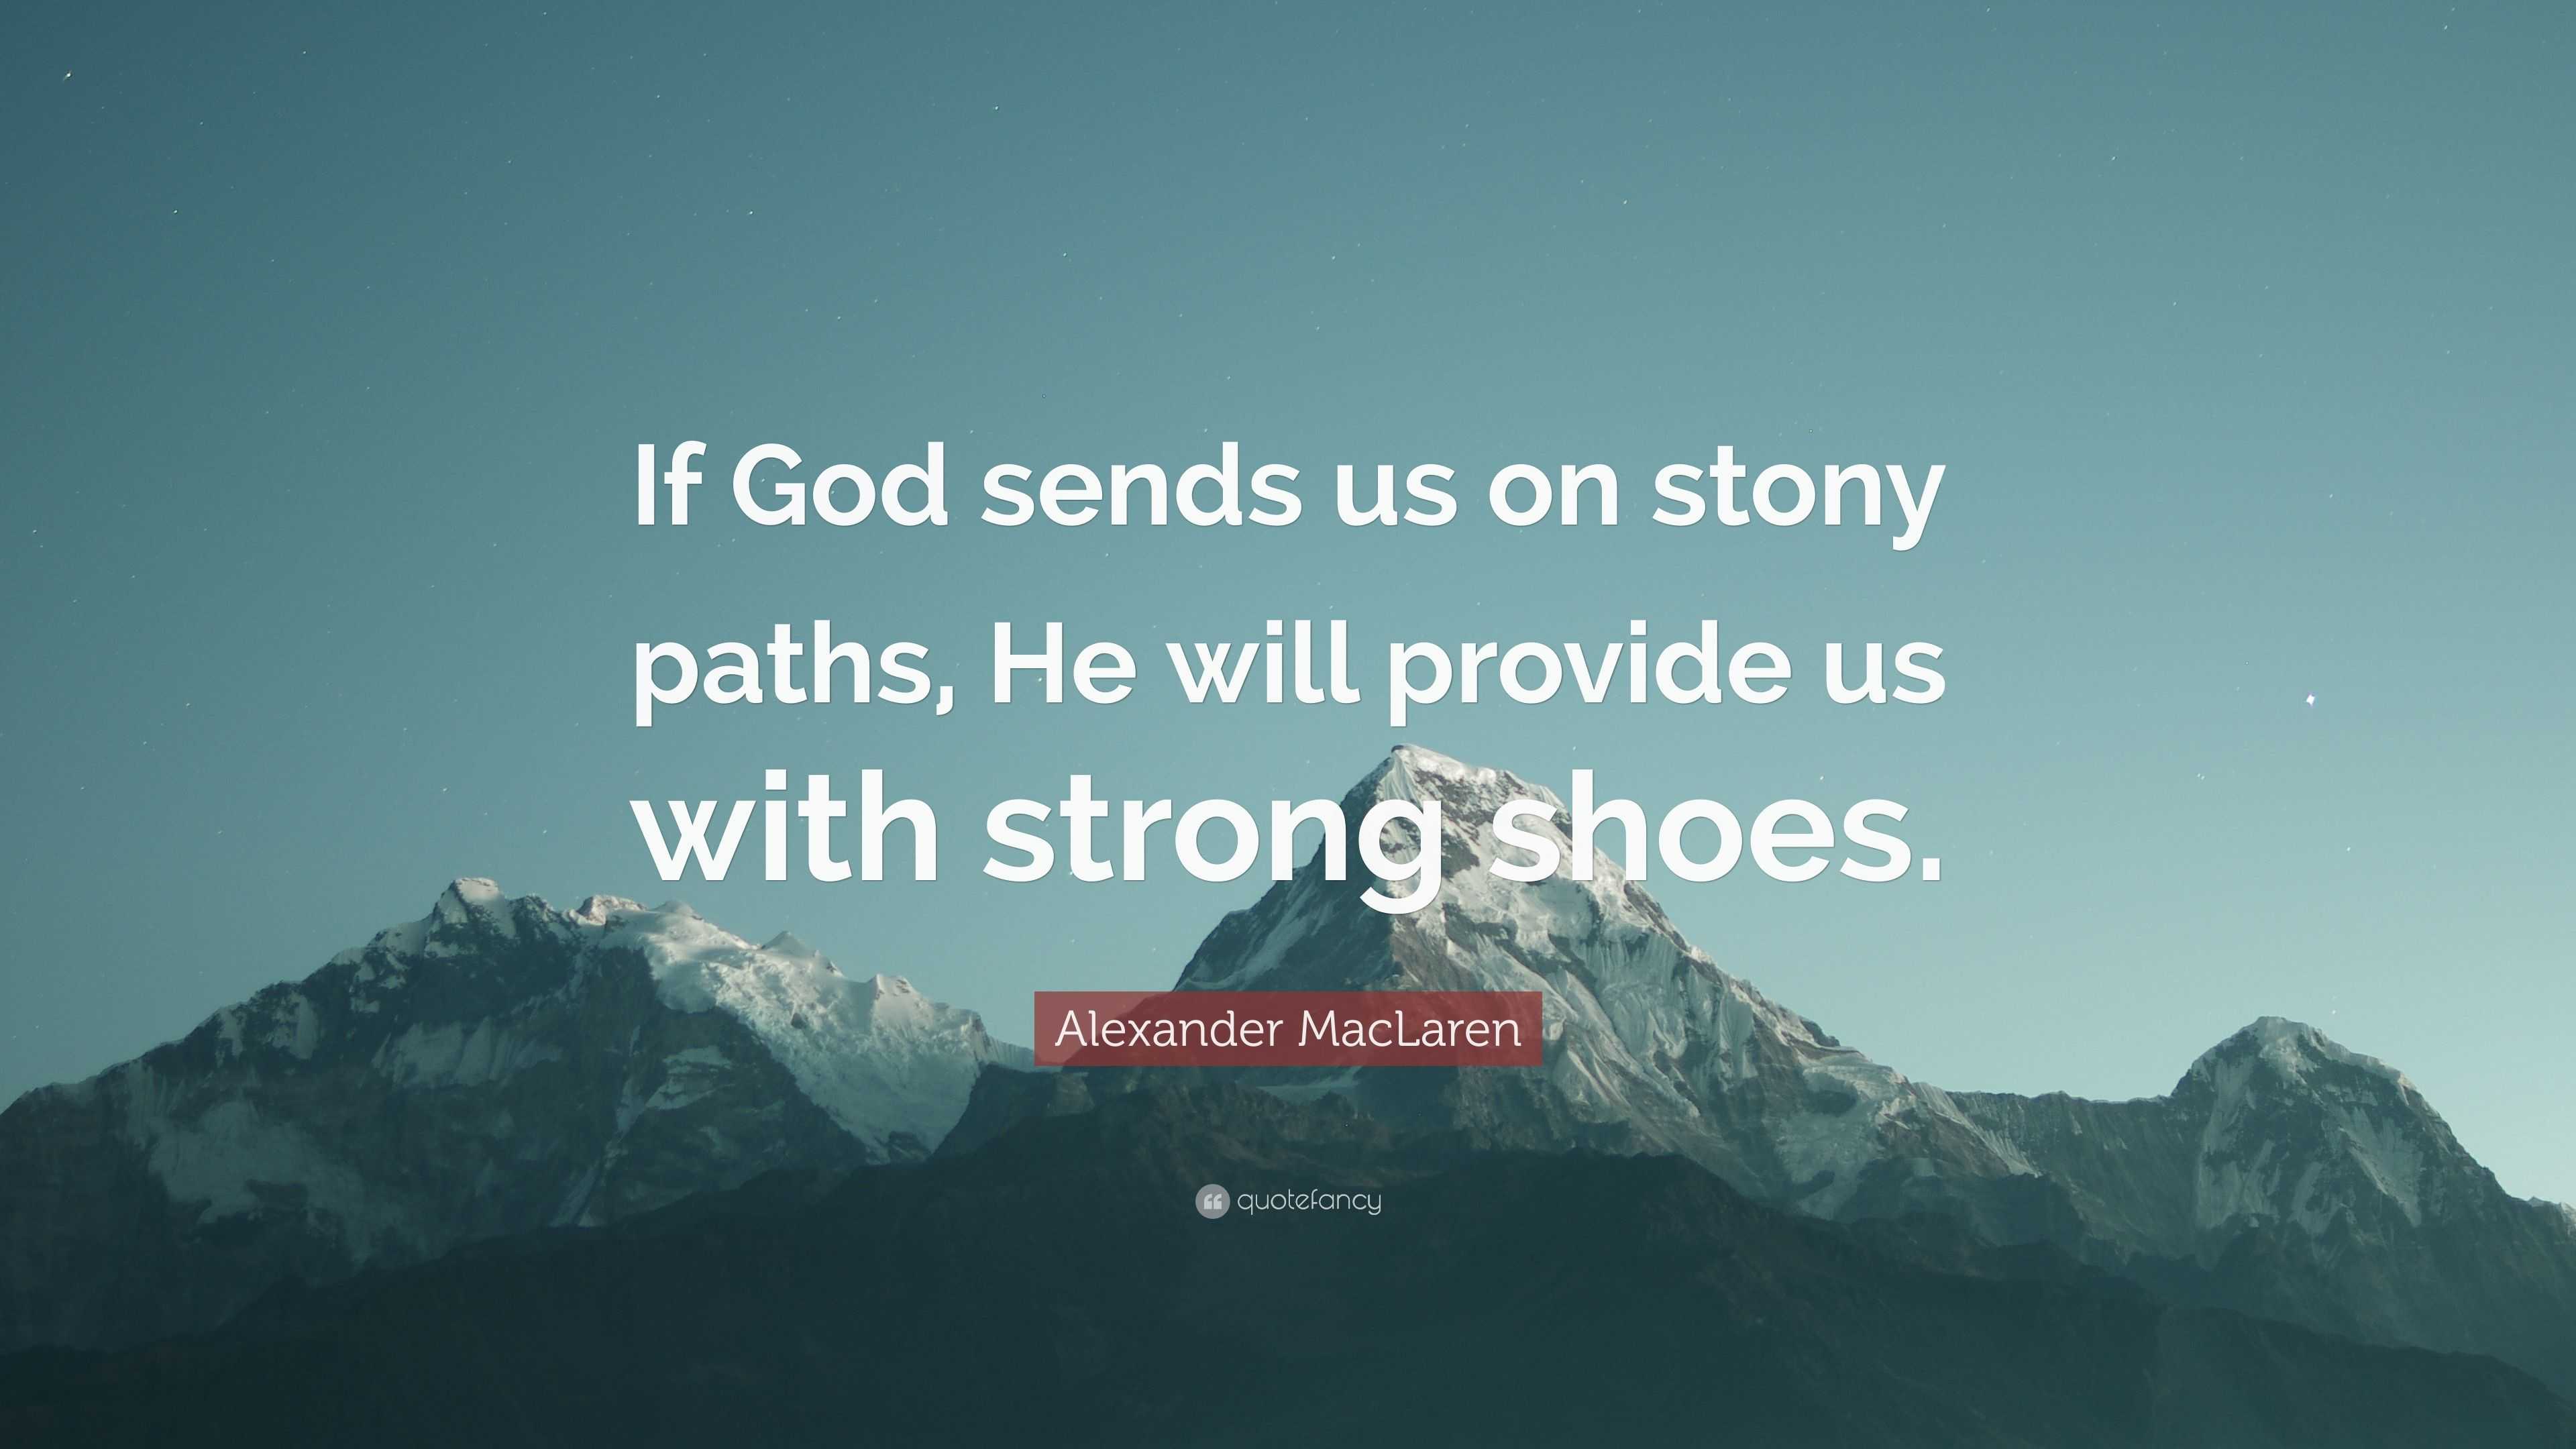 Alexander Maclaren Quote “if God Sends Us On Stony Paths He Will Provide Us With Strong Shoes ”